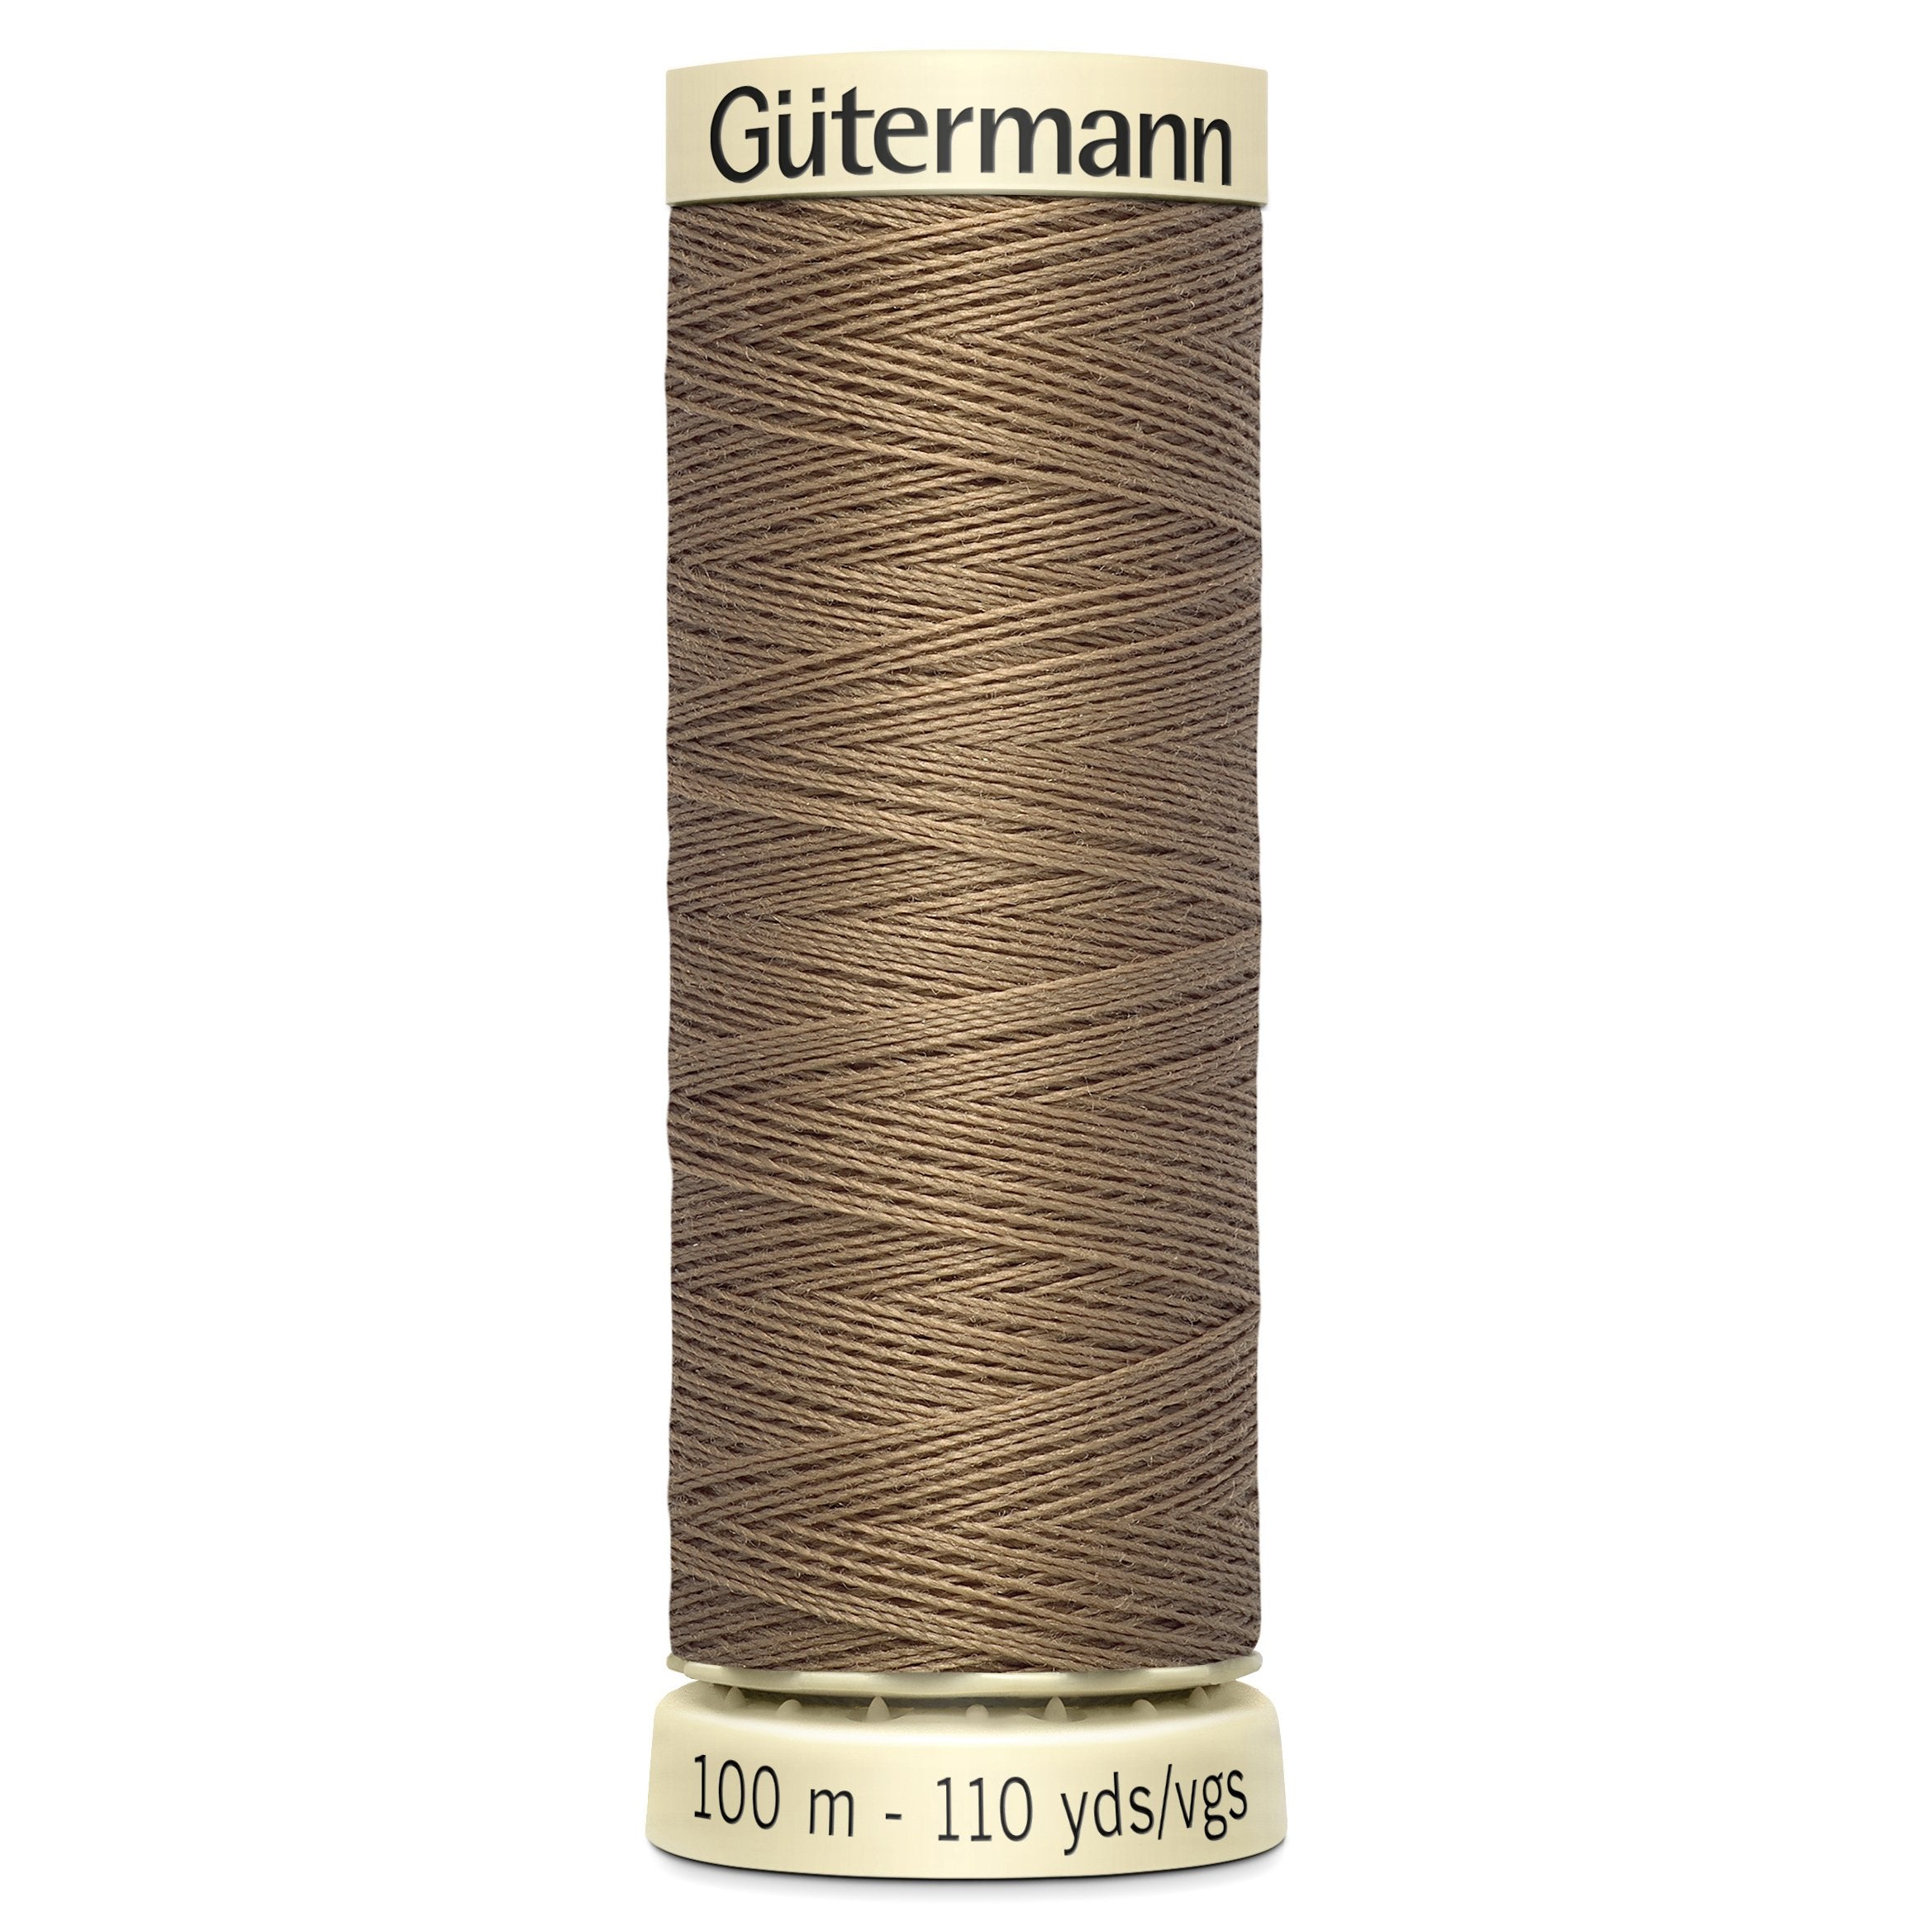 Gutermann Sew All Thread colour 850 Light Brown from Jaycotts Sewing Supplies